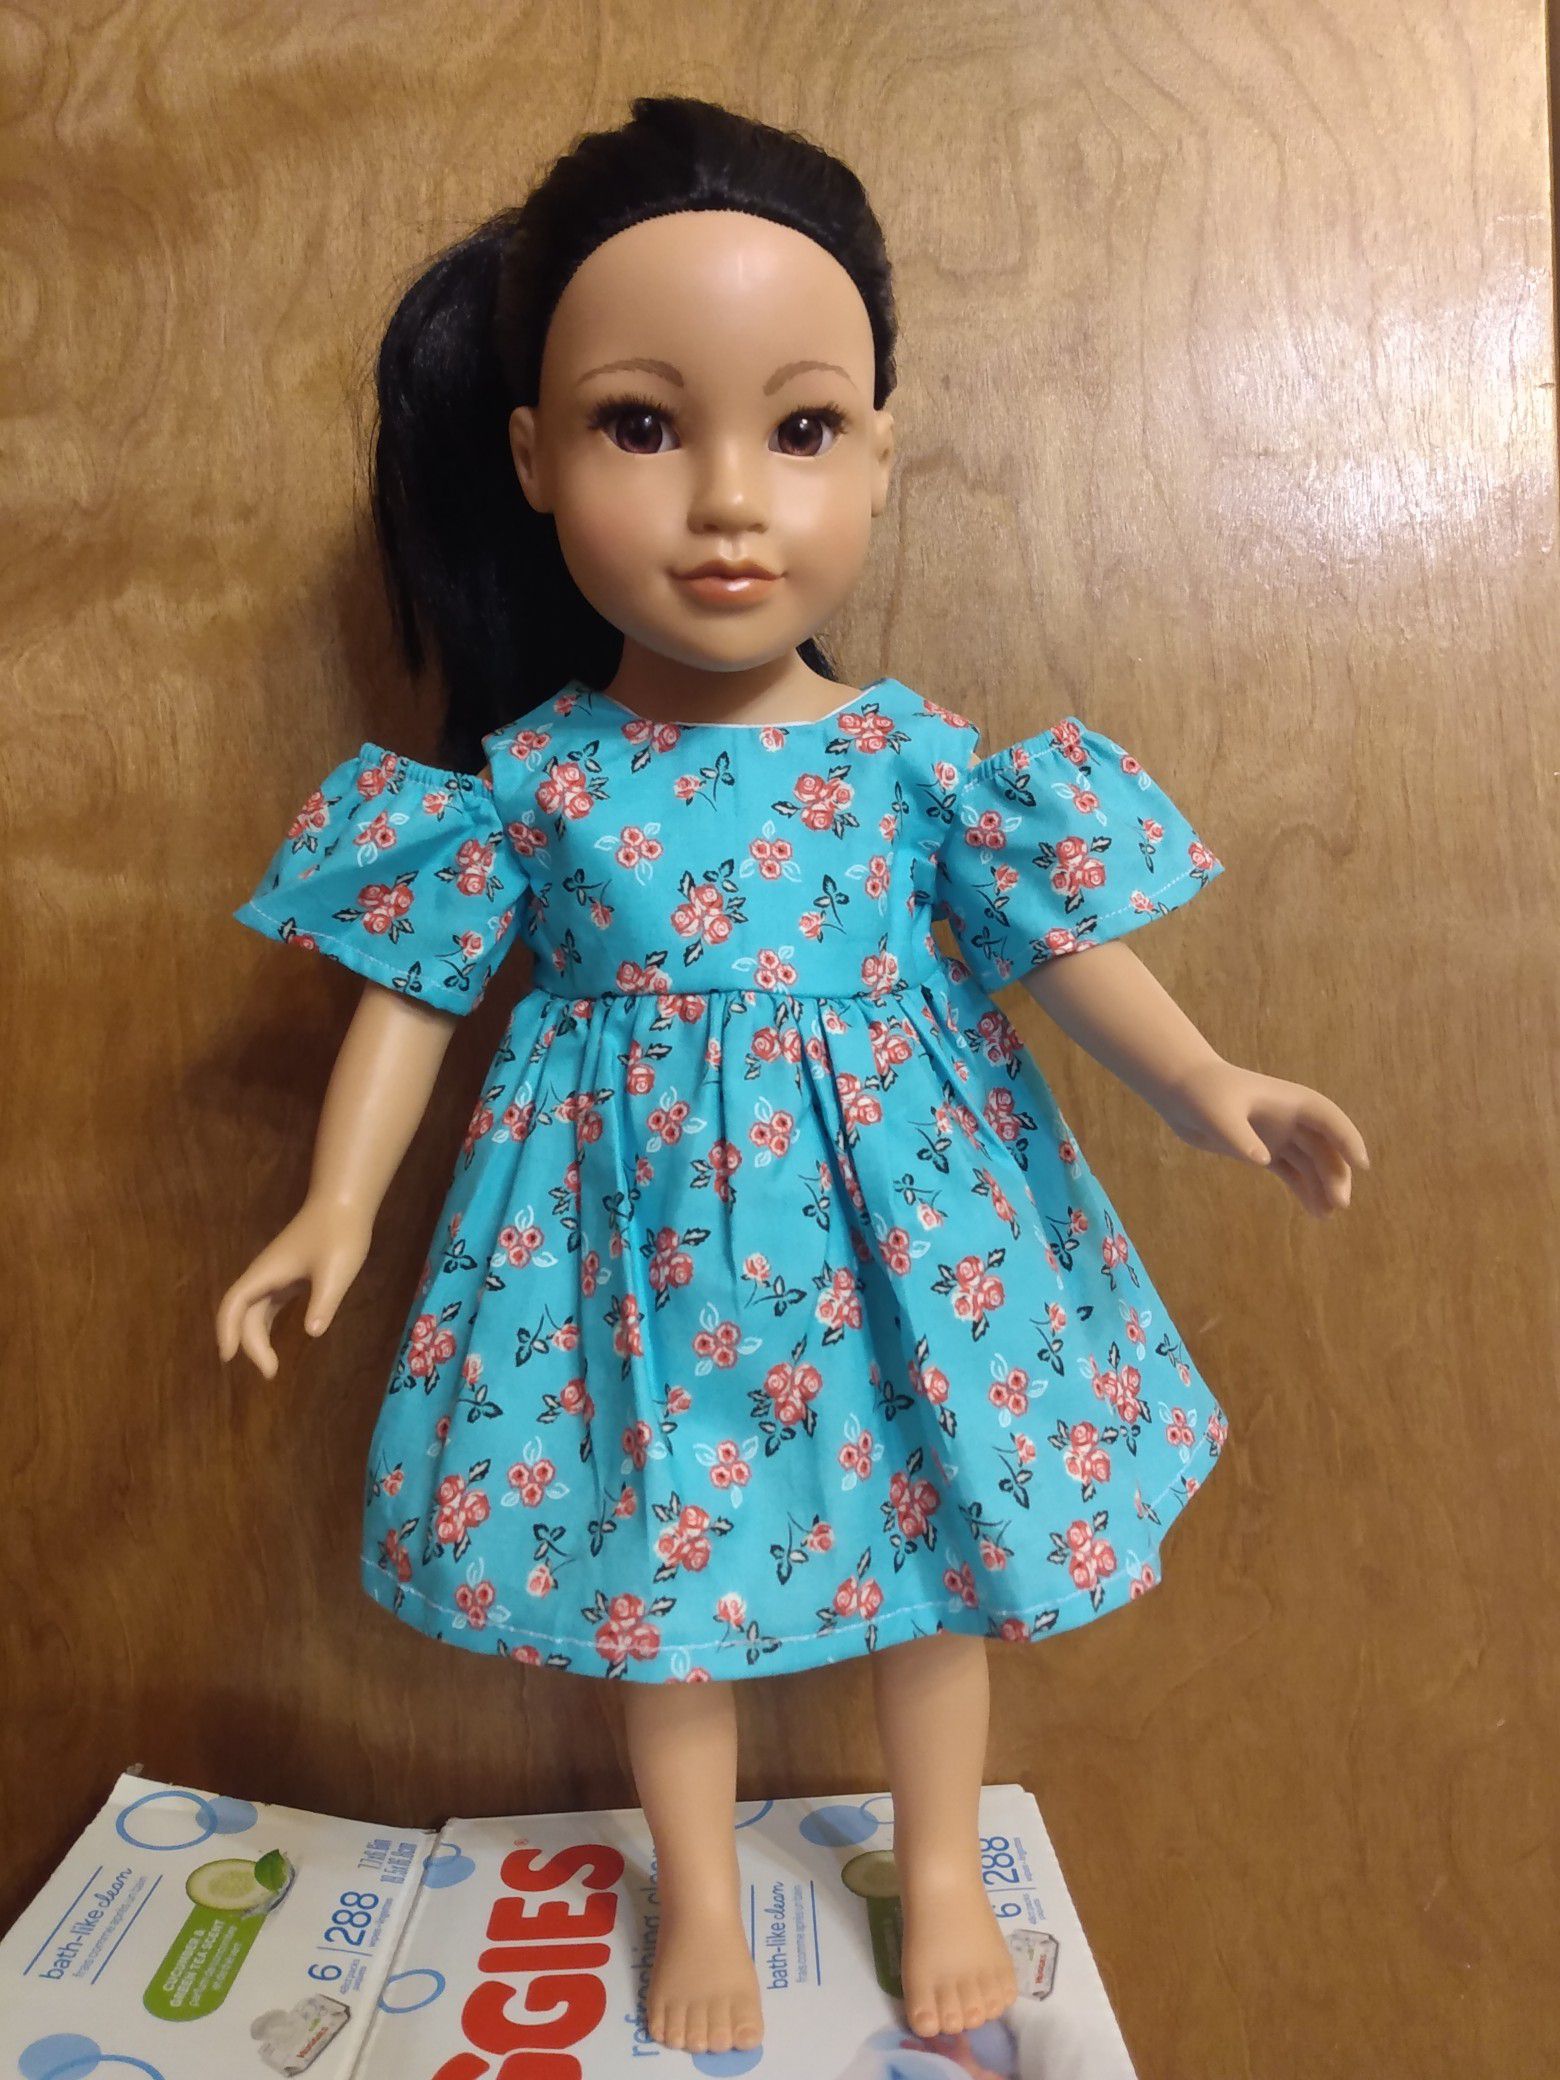 American Girl Or 18"inches doll dress made to fit 18" dolls